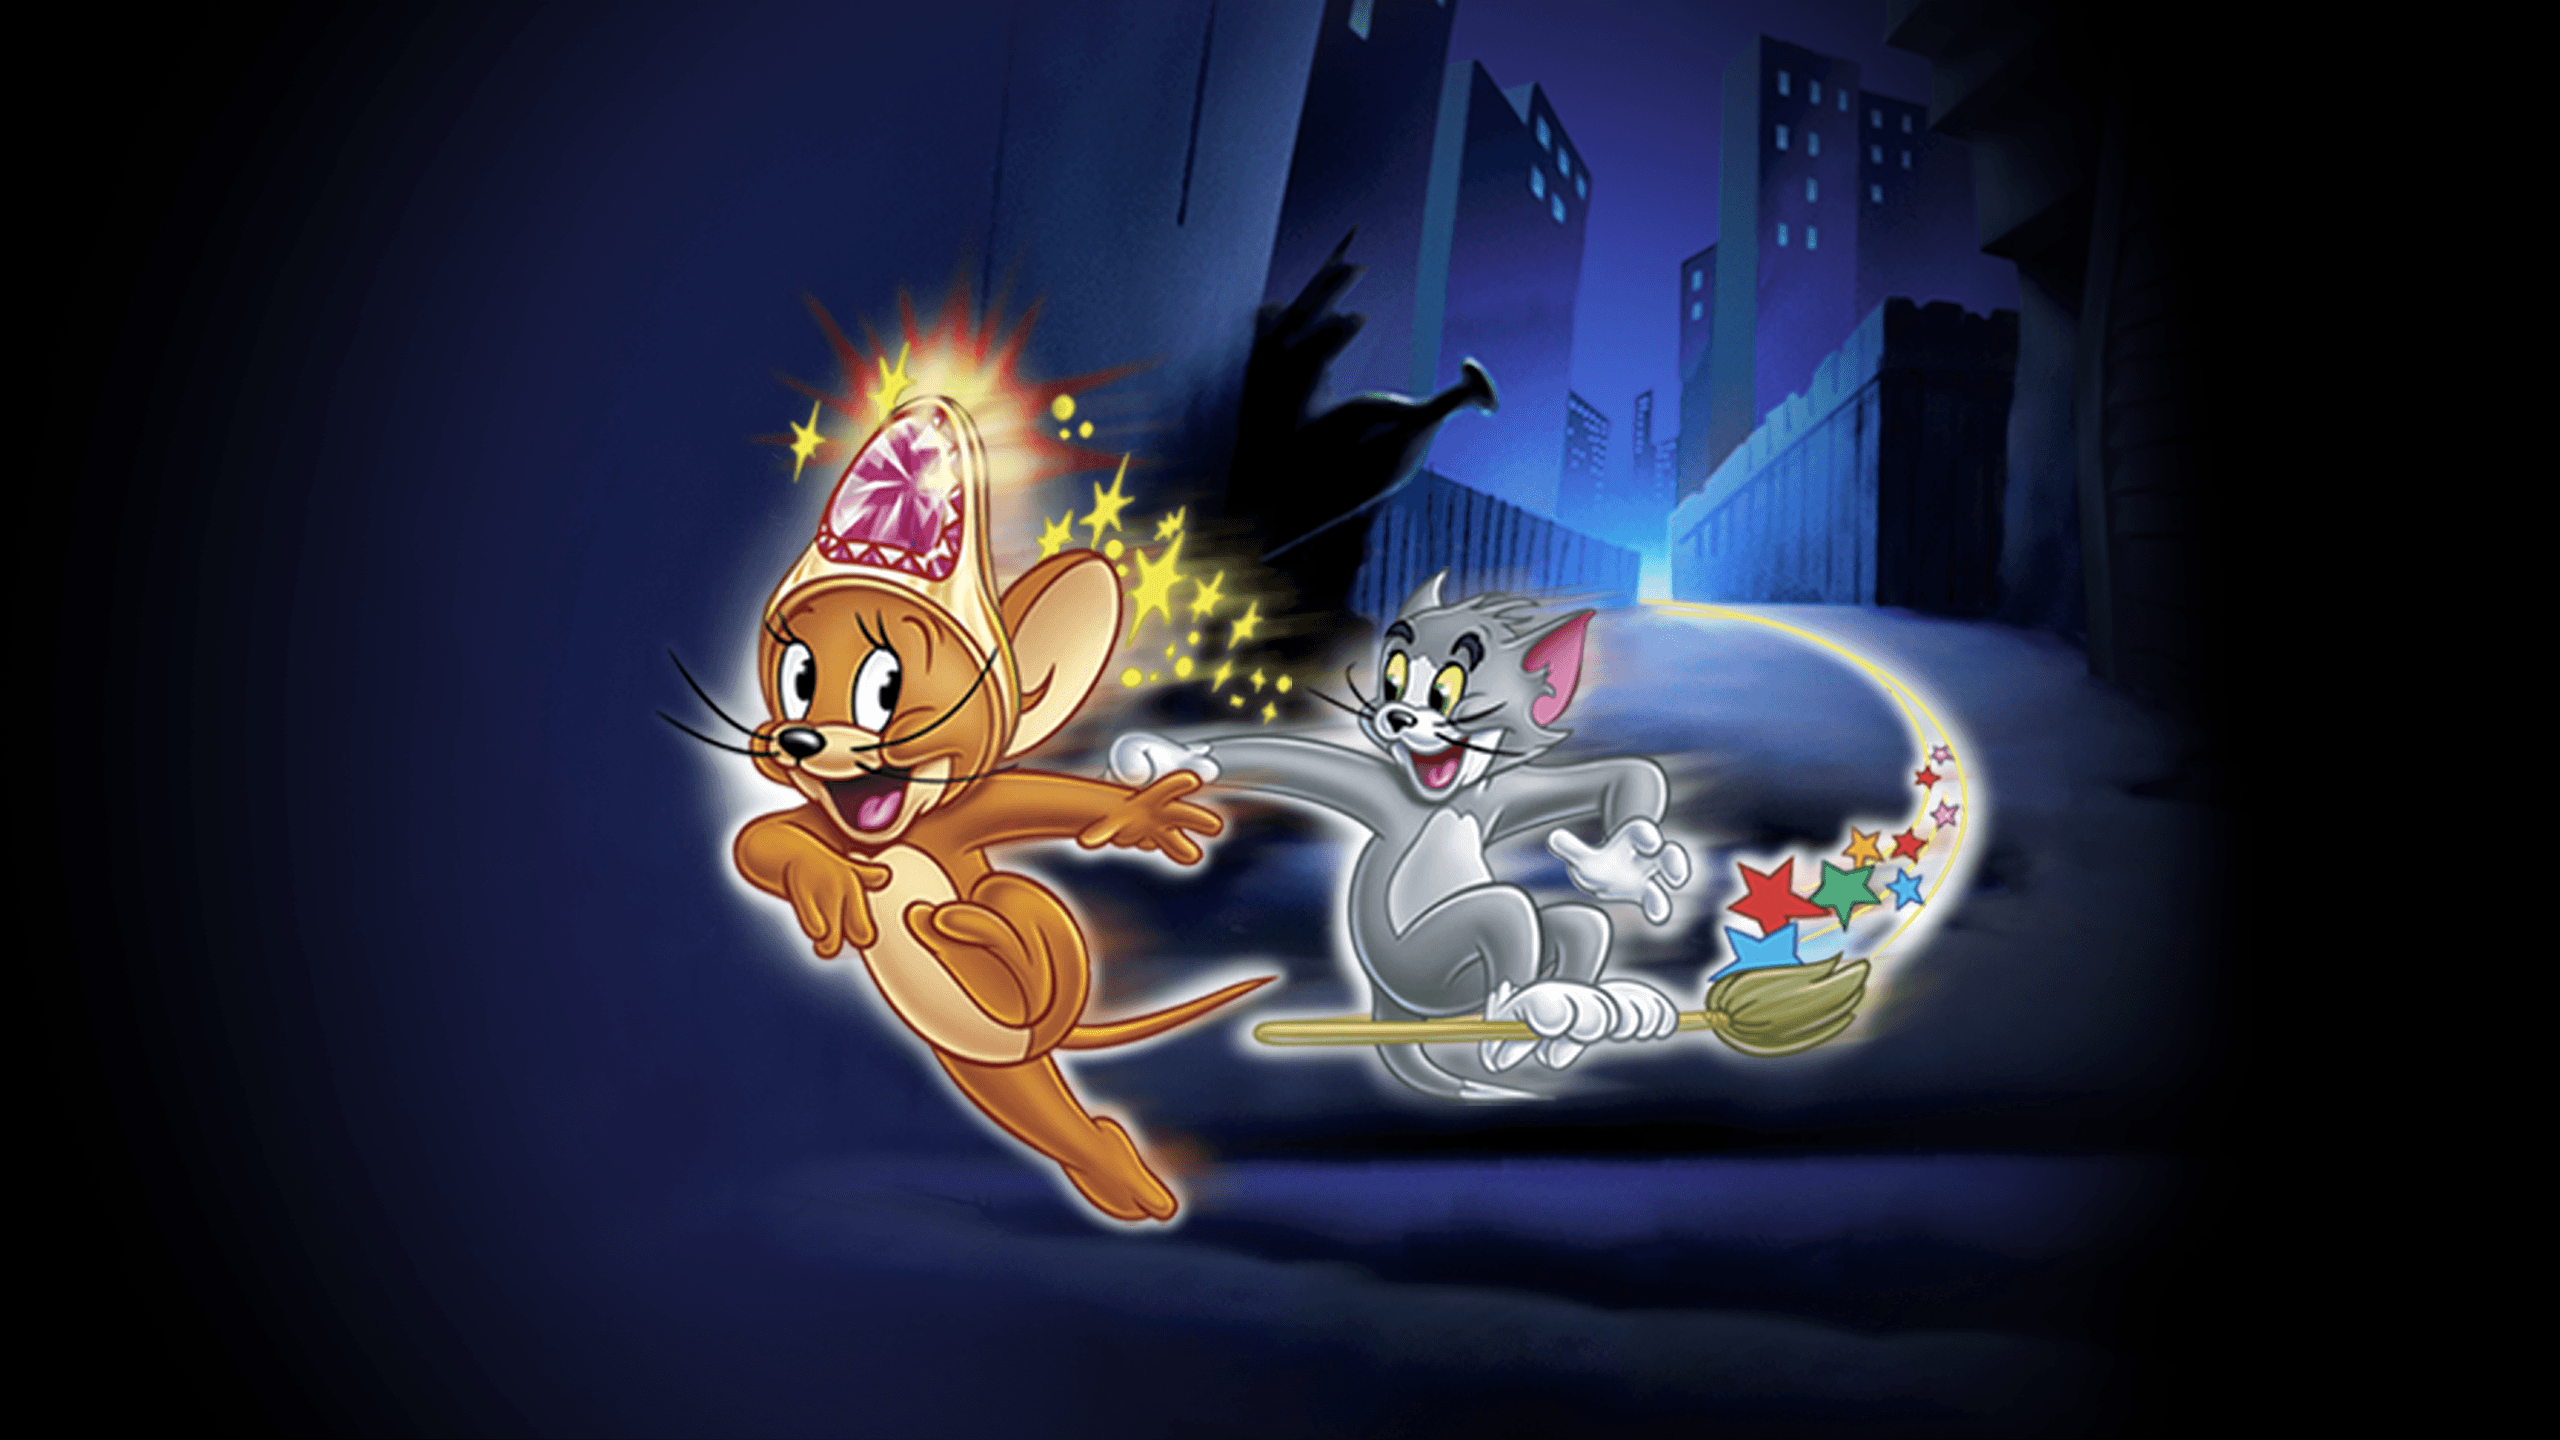 tom and jerry tales wallpaper hd